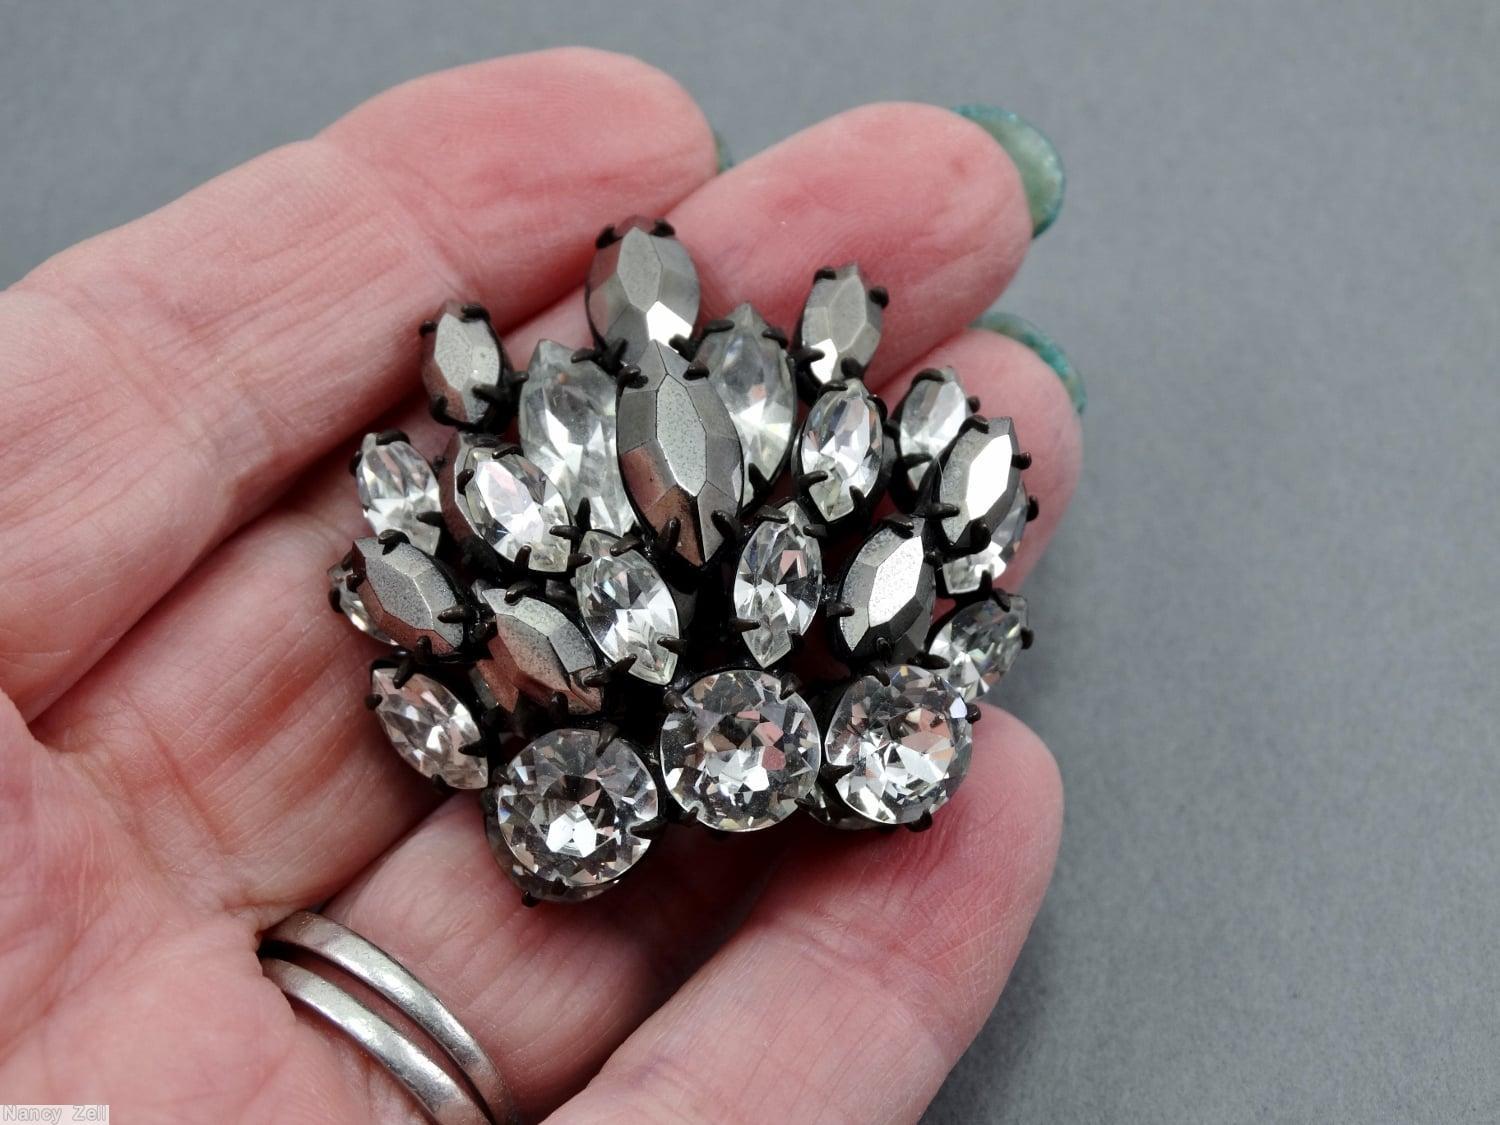 Schreiner side radial 2 level pin 3 chaton varied size navette crystal metalic silver navette jewelry